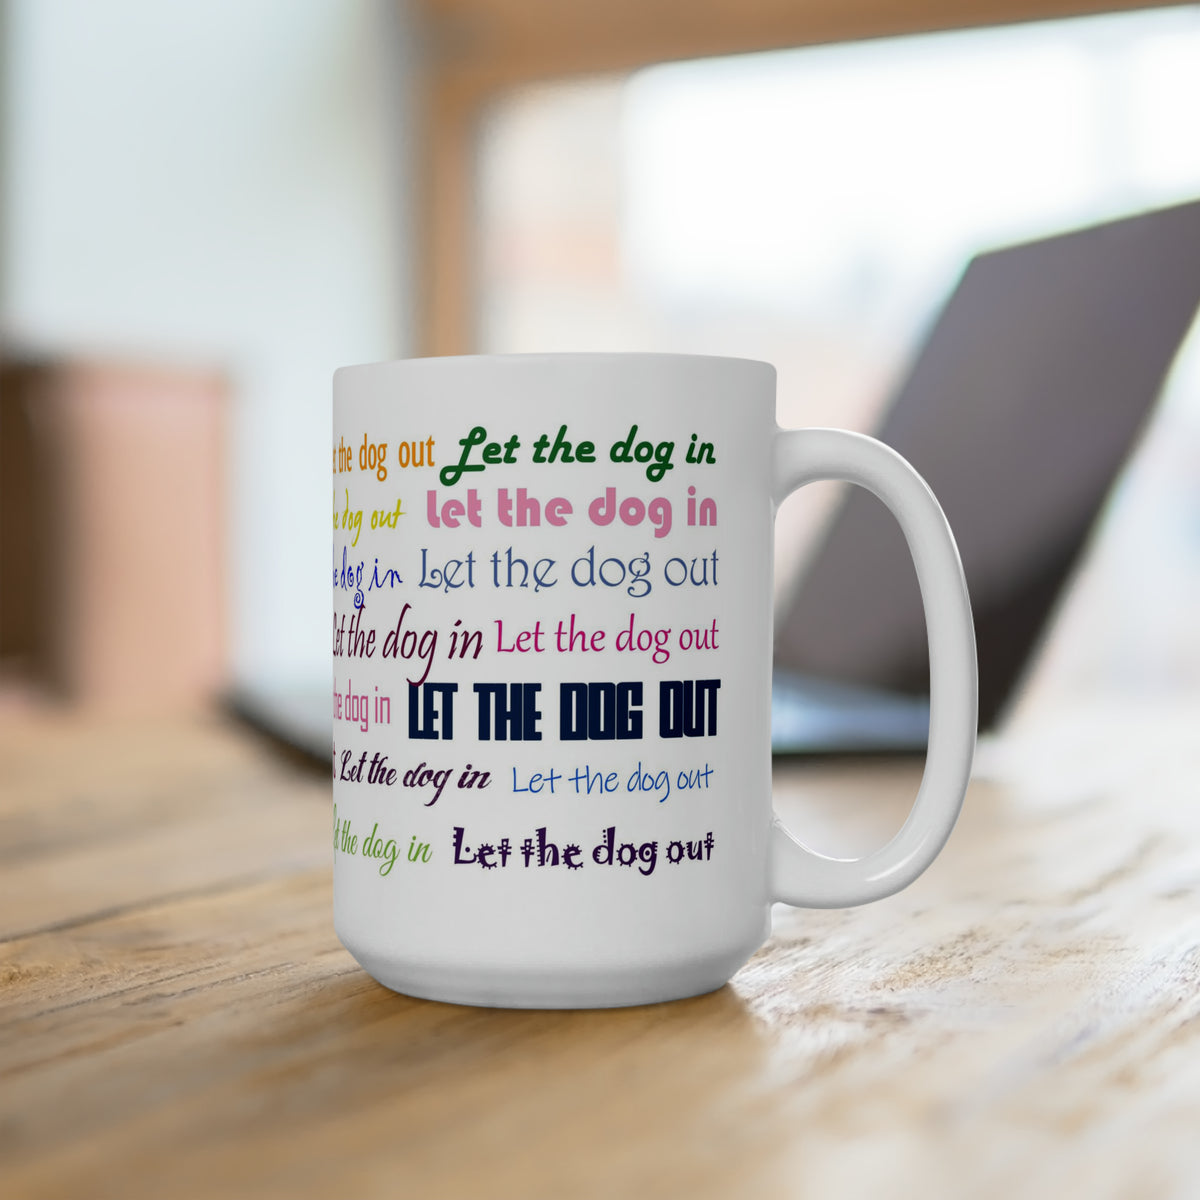 Let the Dog Out, Let the Dog In.  Dog Lovers Understand This.  Humorous Mug for Dog Lovers